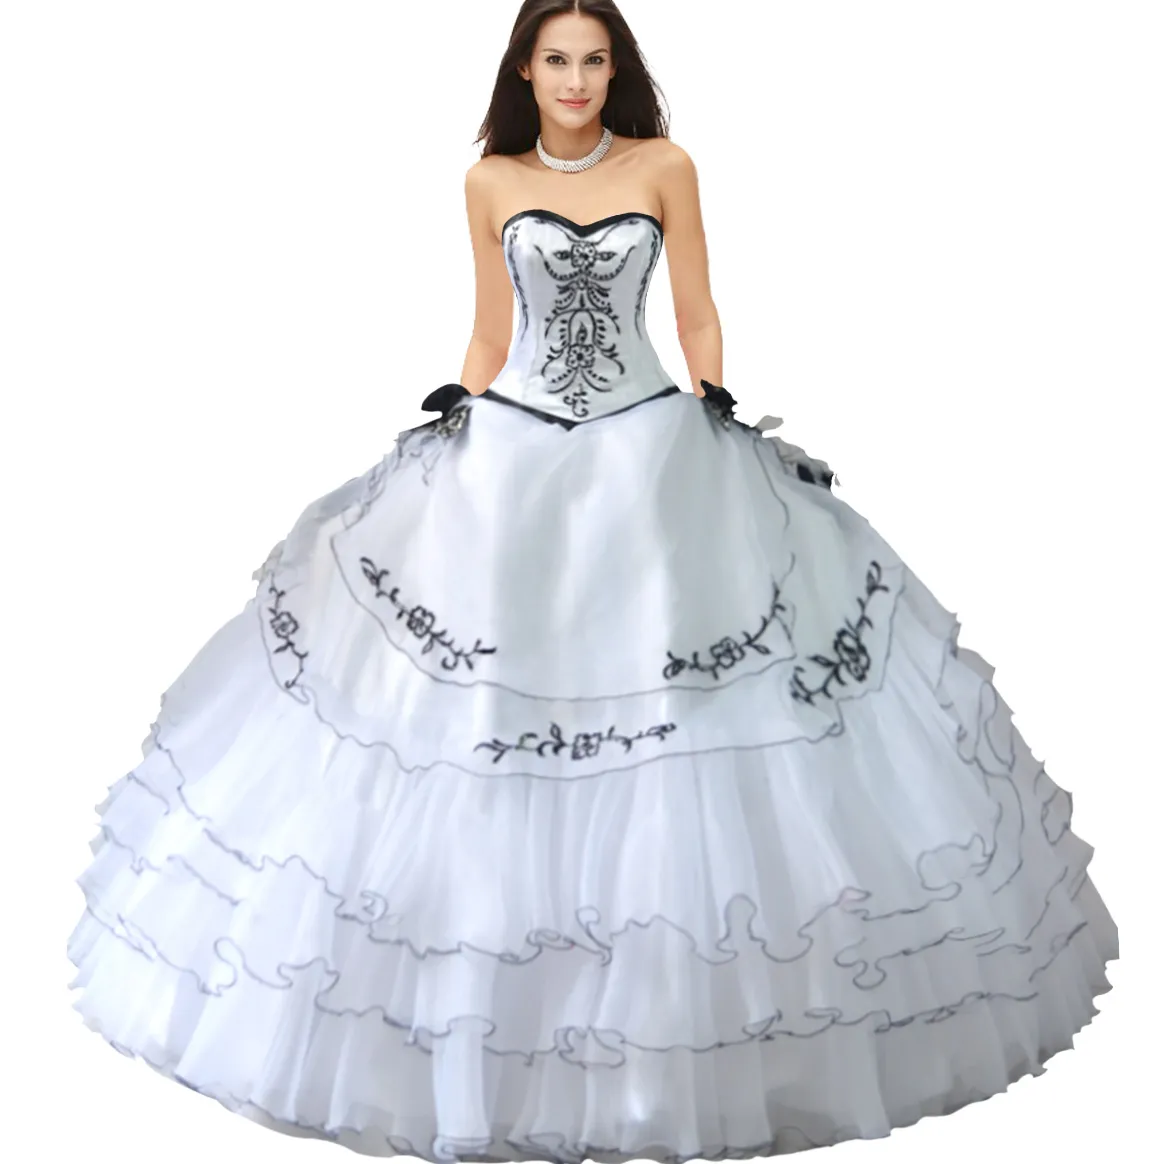 Elegant Beaded Embroidery Handmade 3D Flowers Quinceanera Dress White and Black Classical Debutante Sweet 16 Ball Gown XV